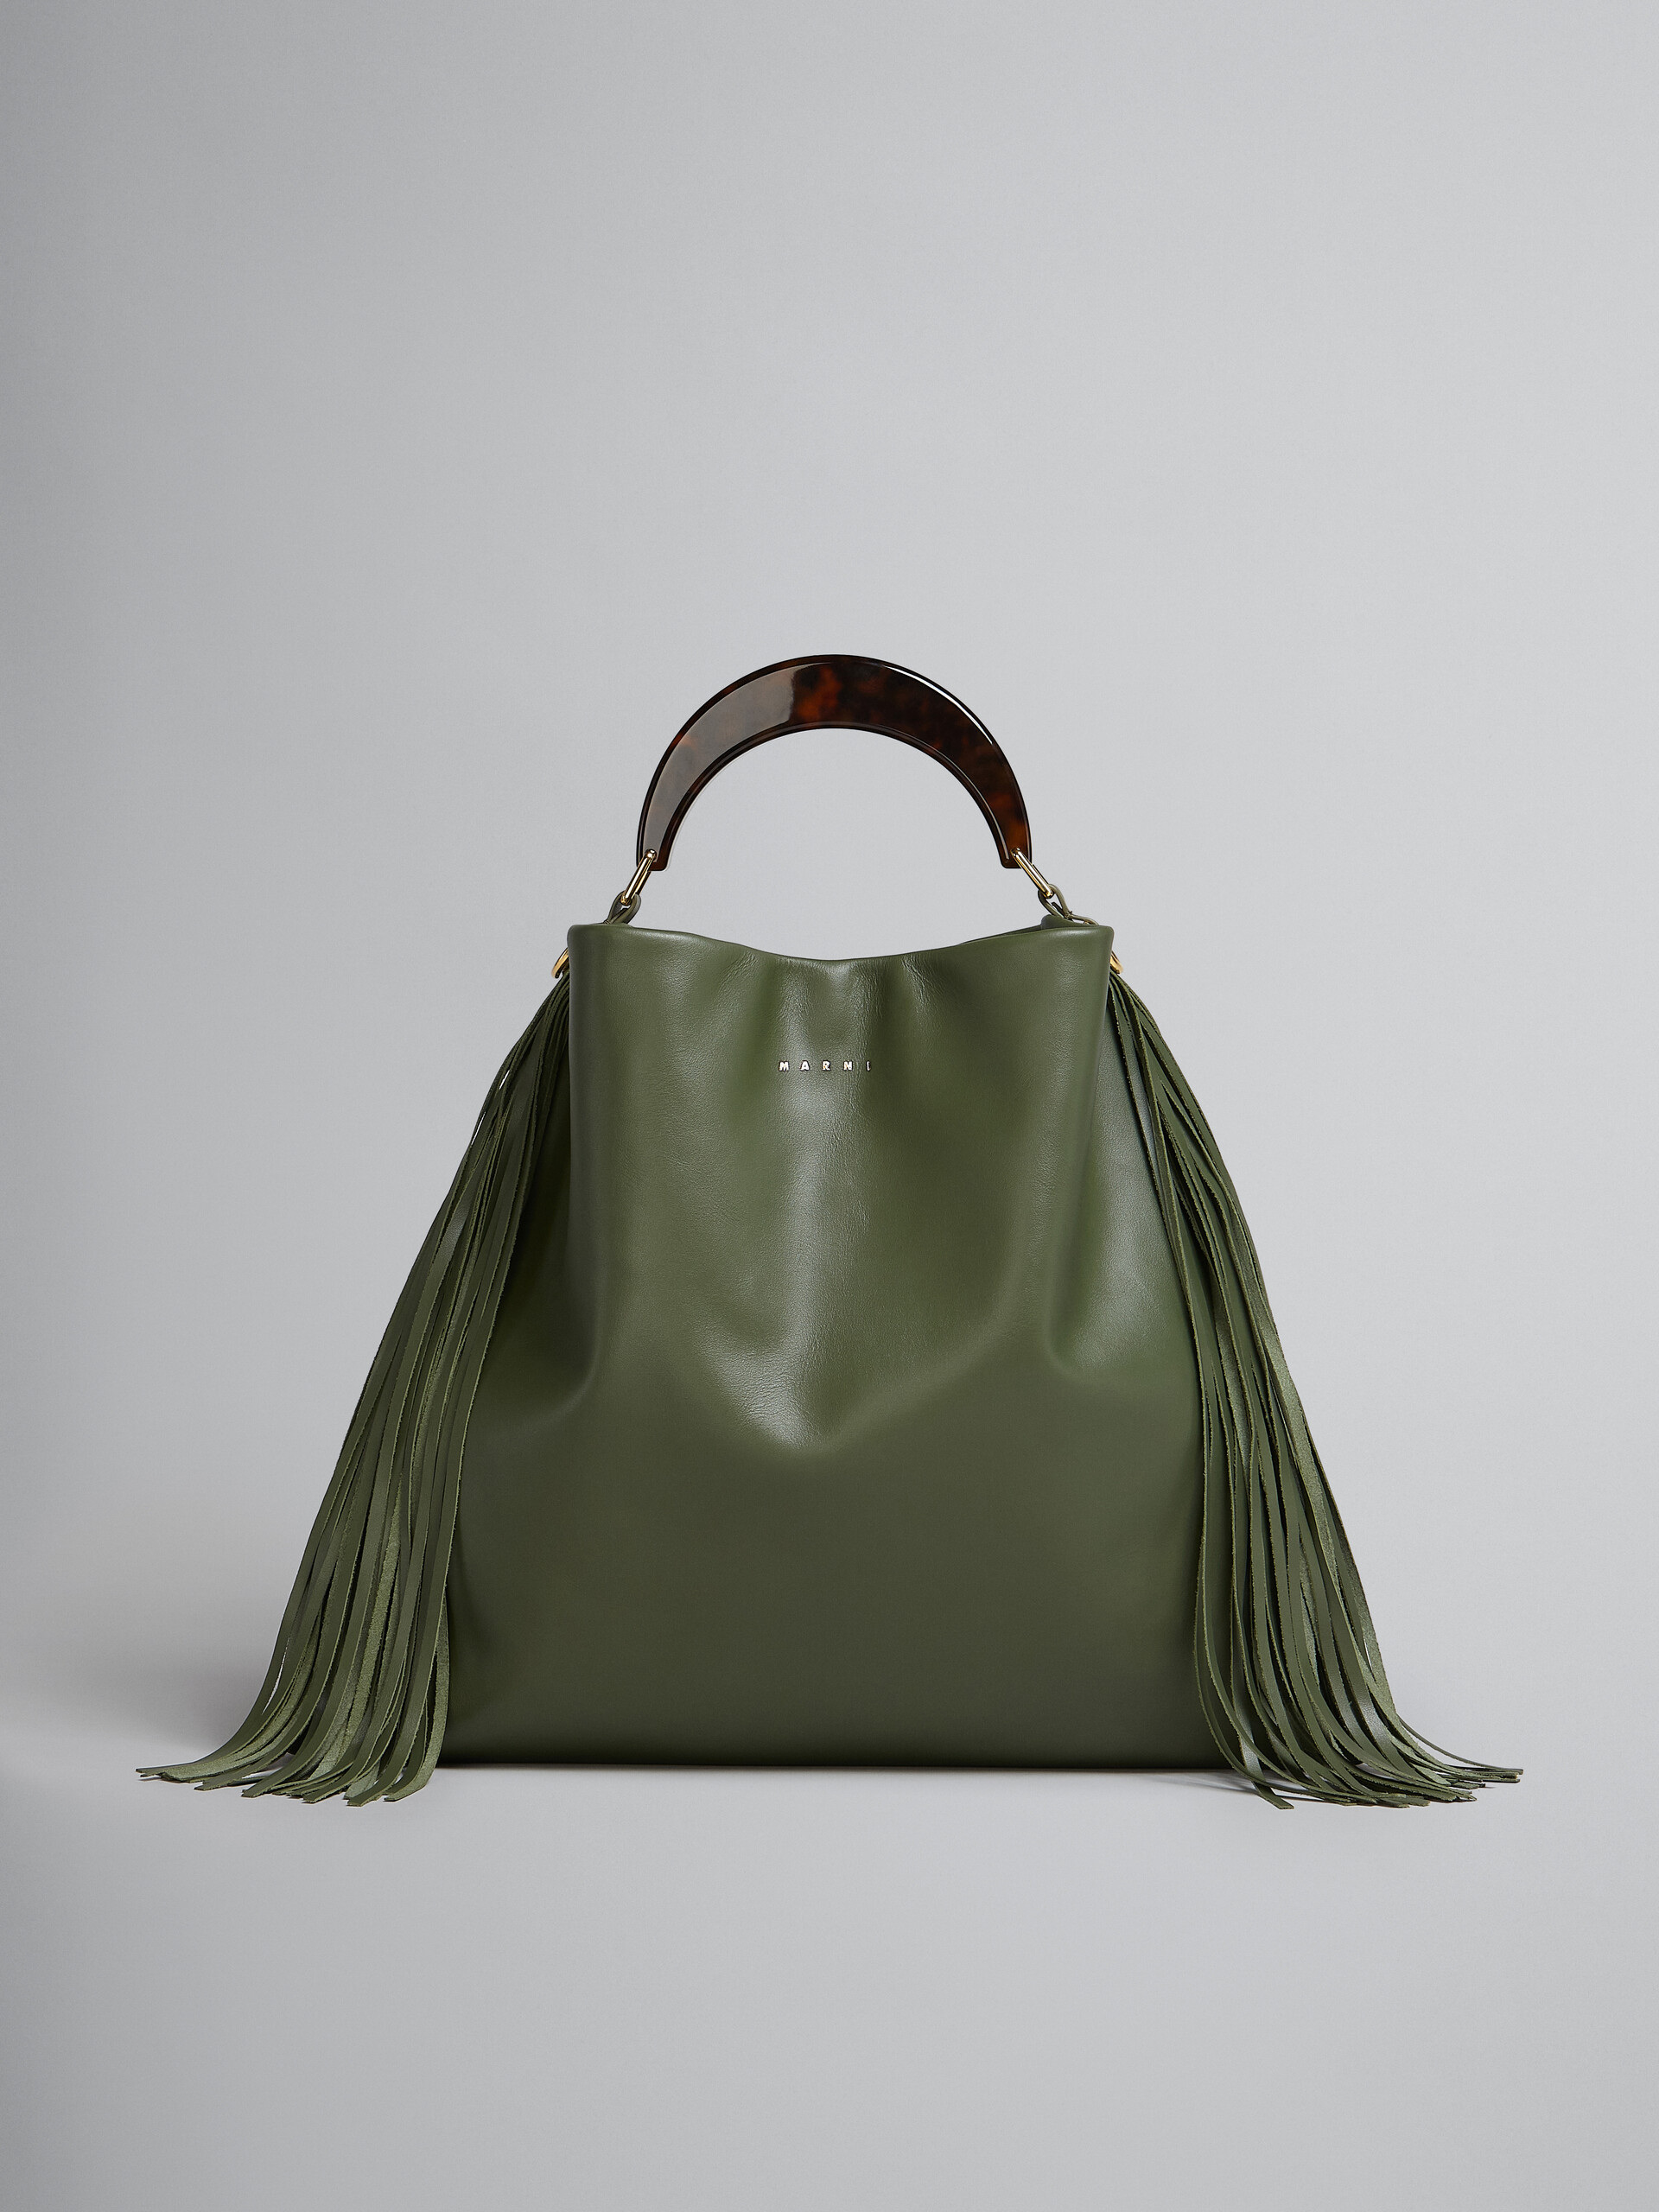 Venice Medium Bag in green leather with fringes - Shoulder Bags - Image 1